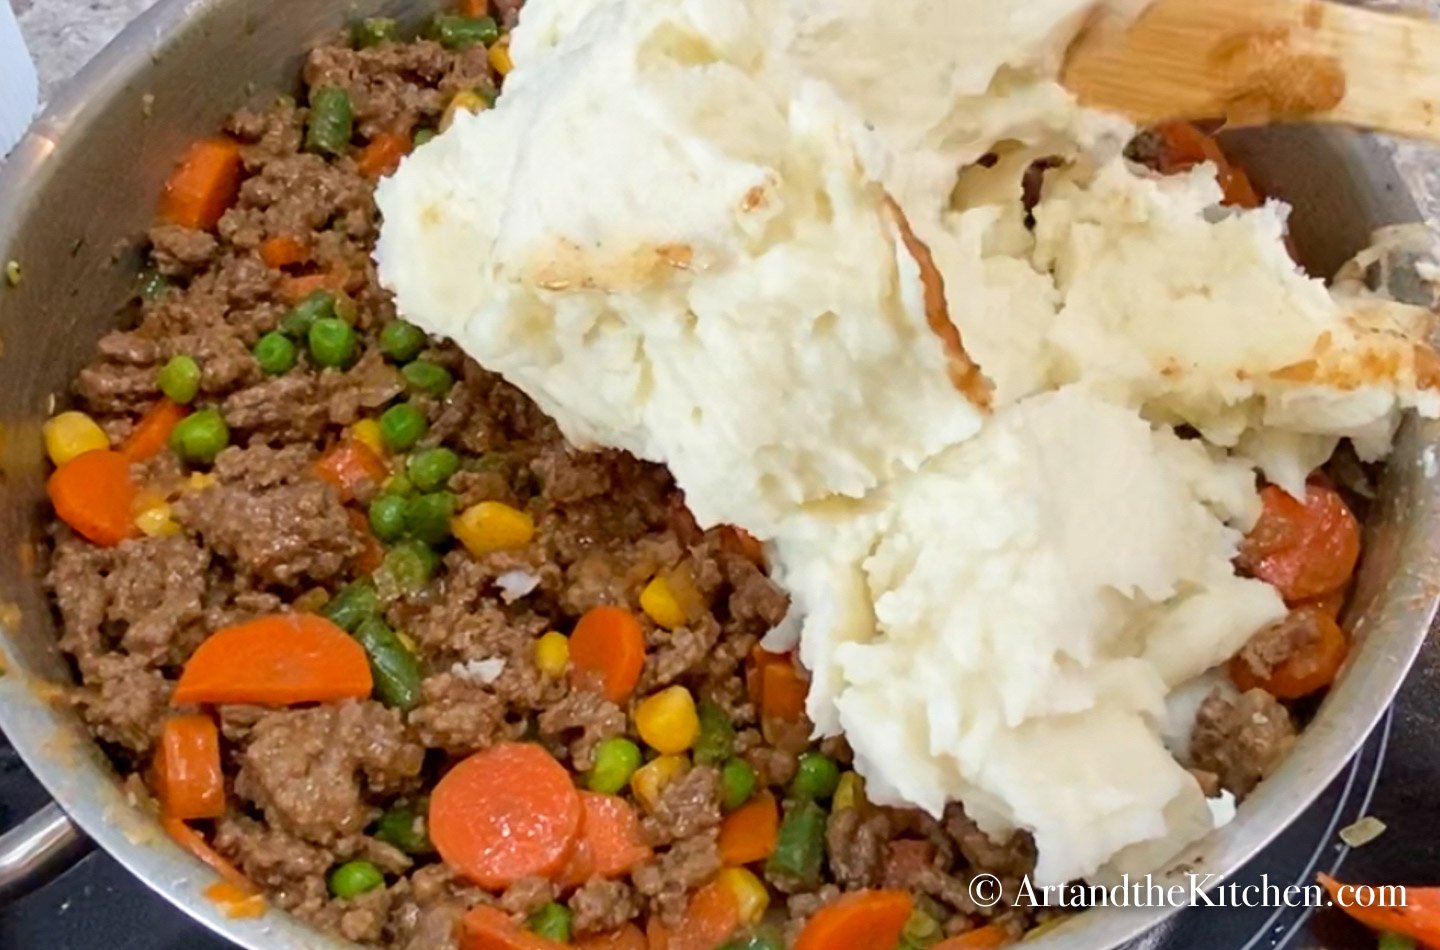 Mashed potatoes being scooped onto cooked ground beef, gravy and vegetable mixture.